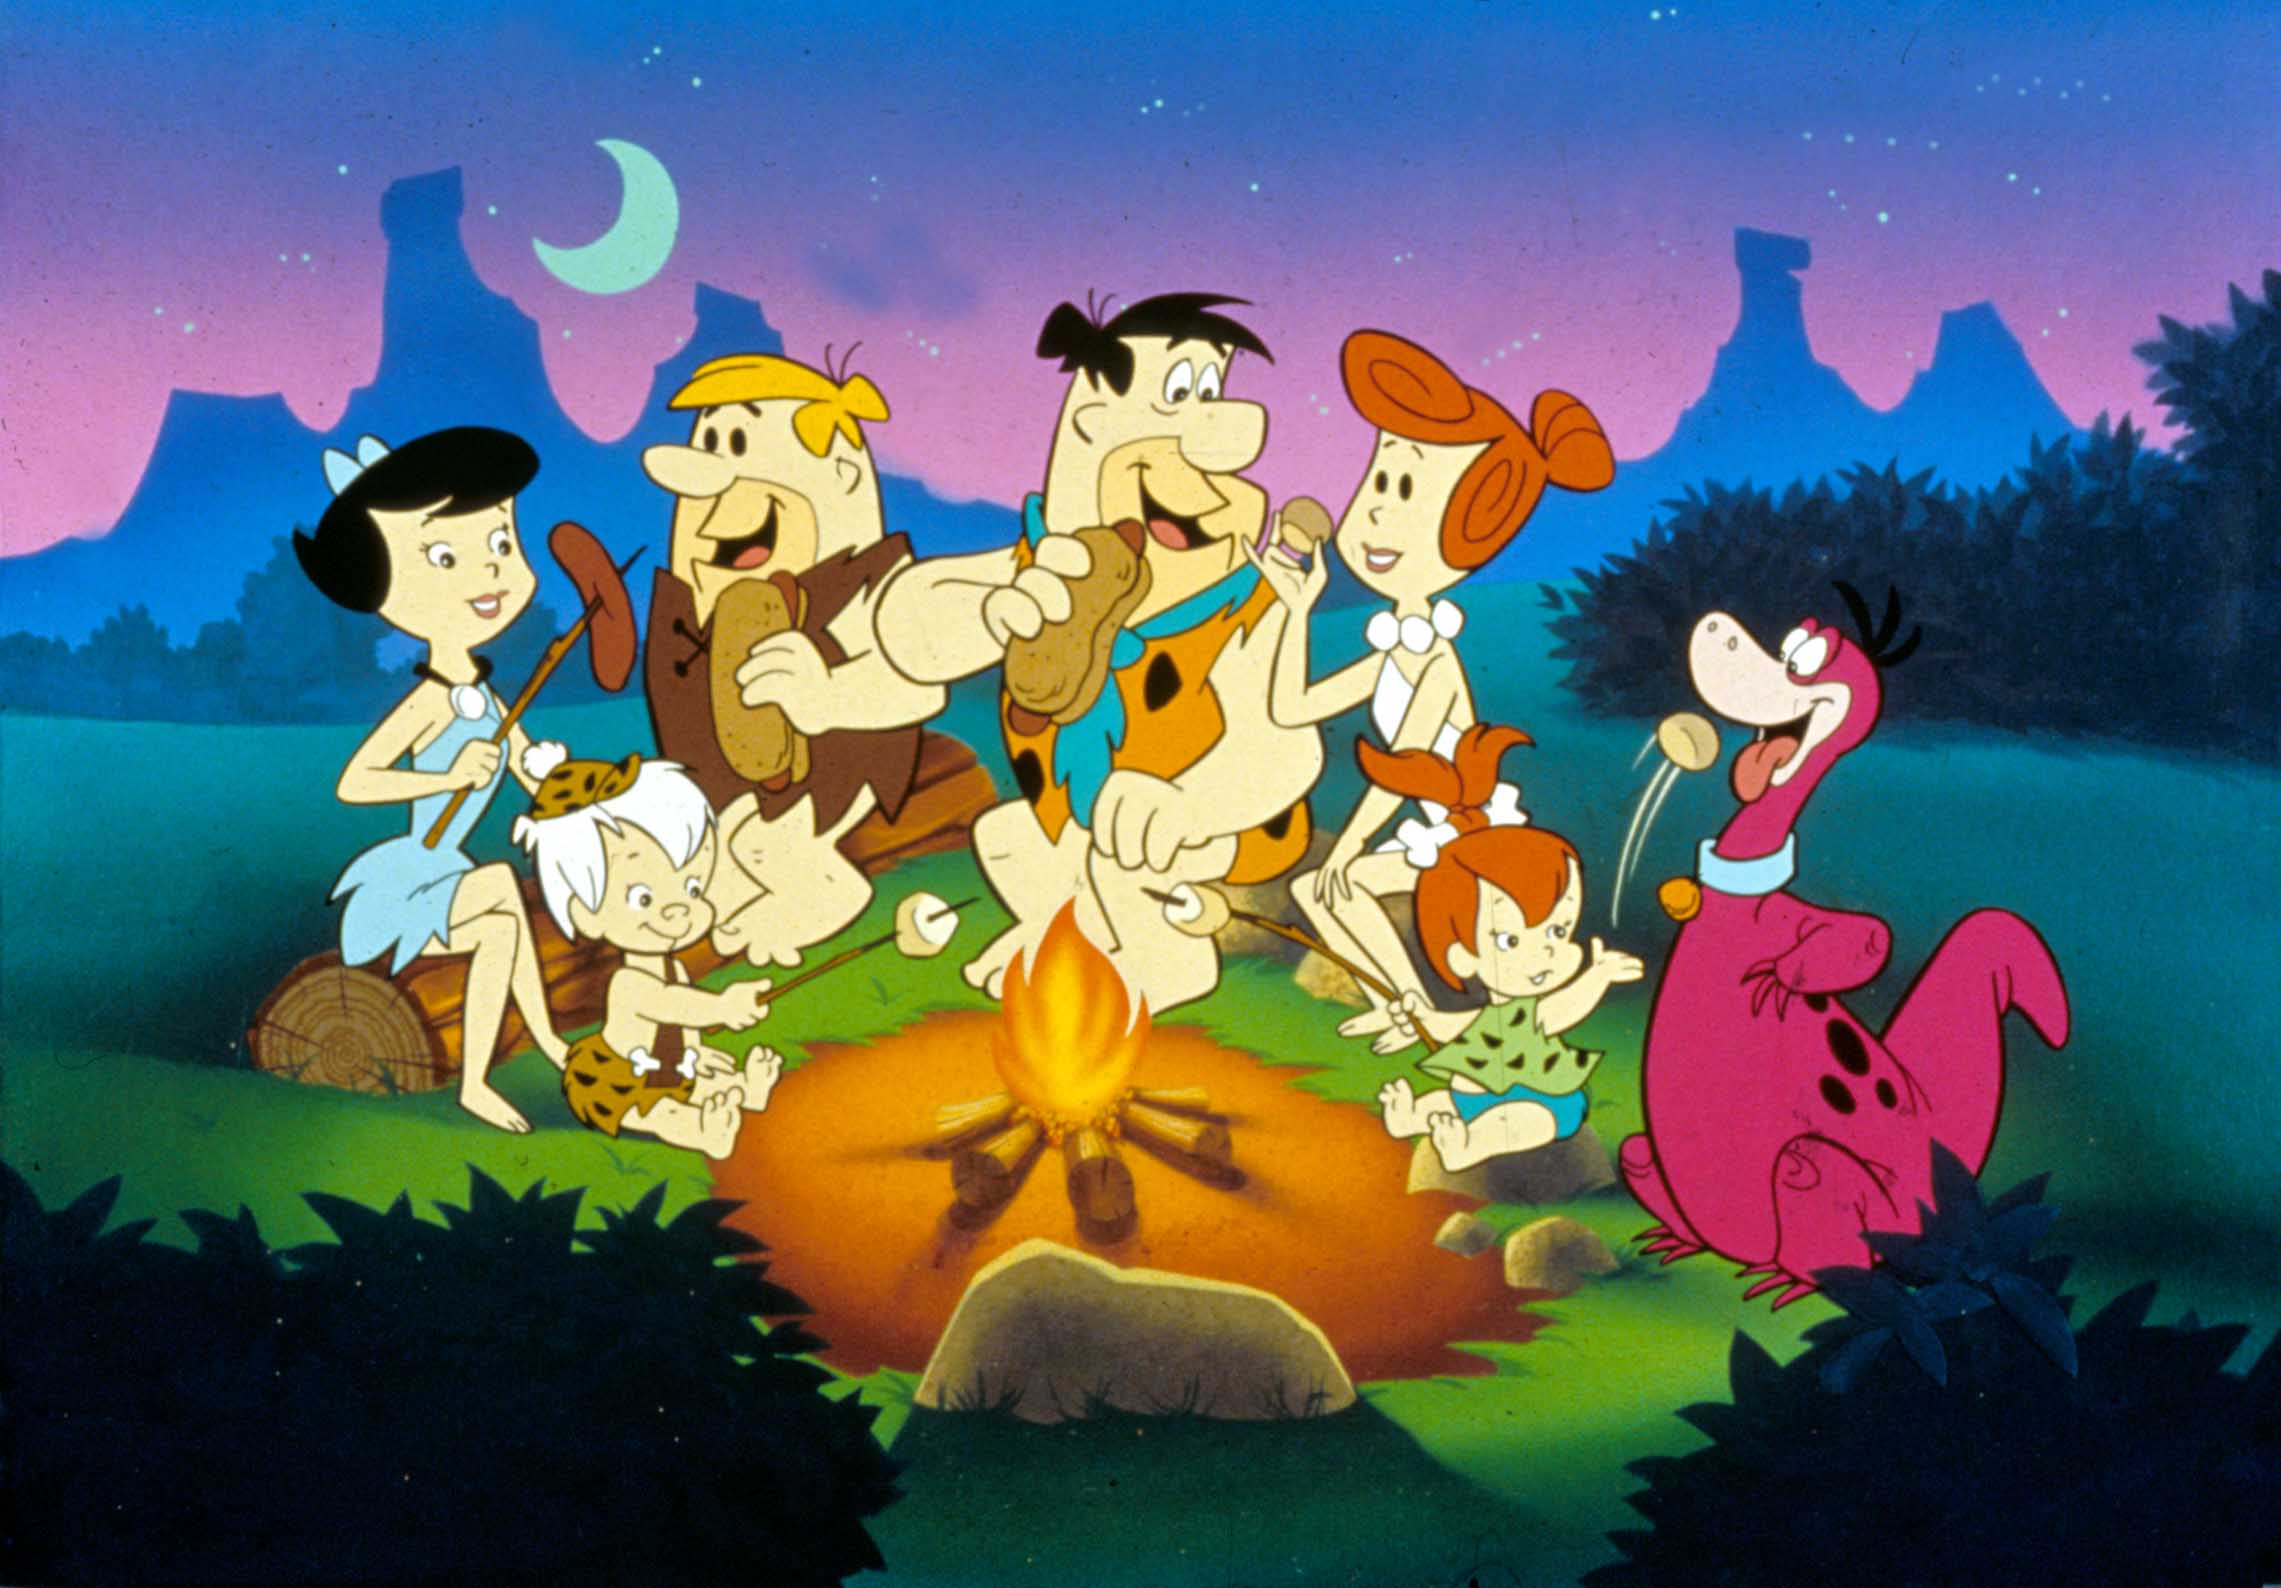 5 Unknown Facts About the Flintstones